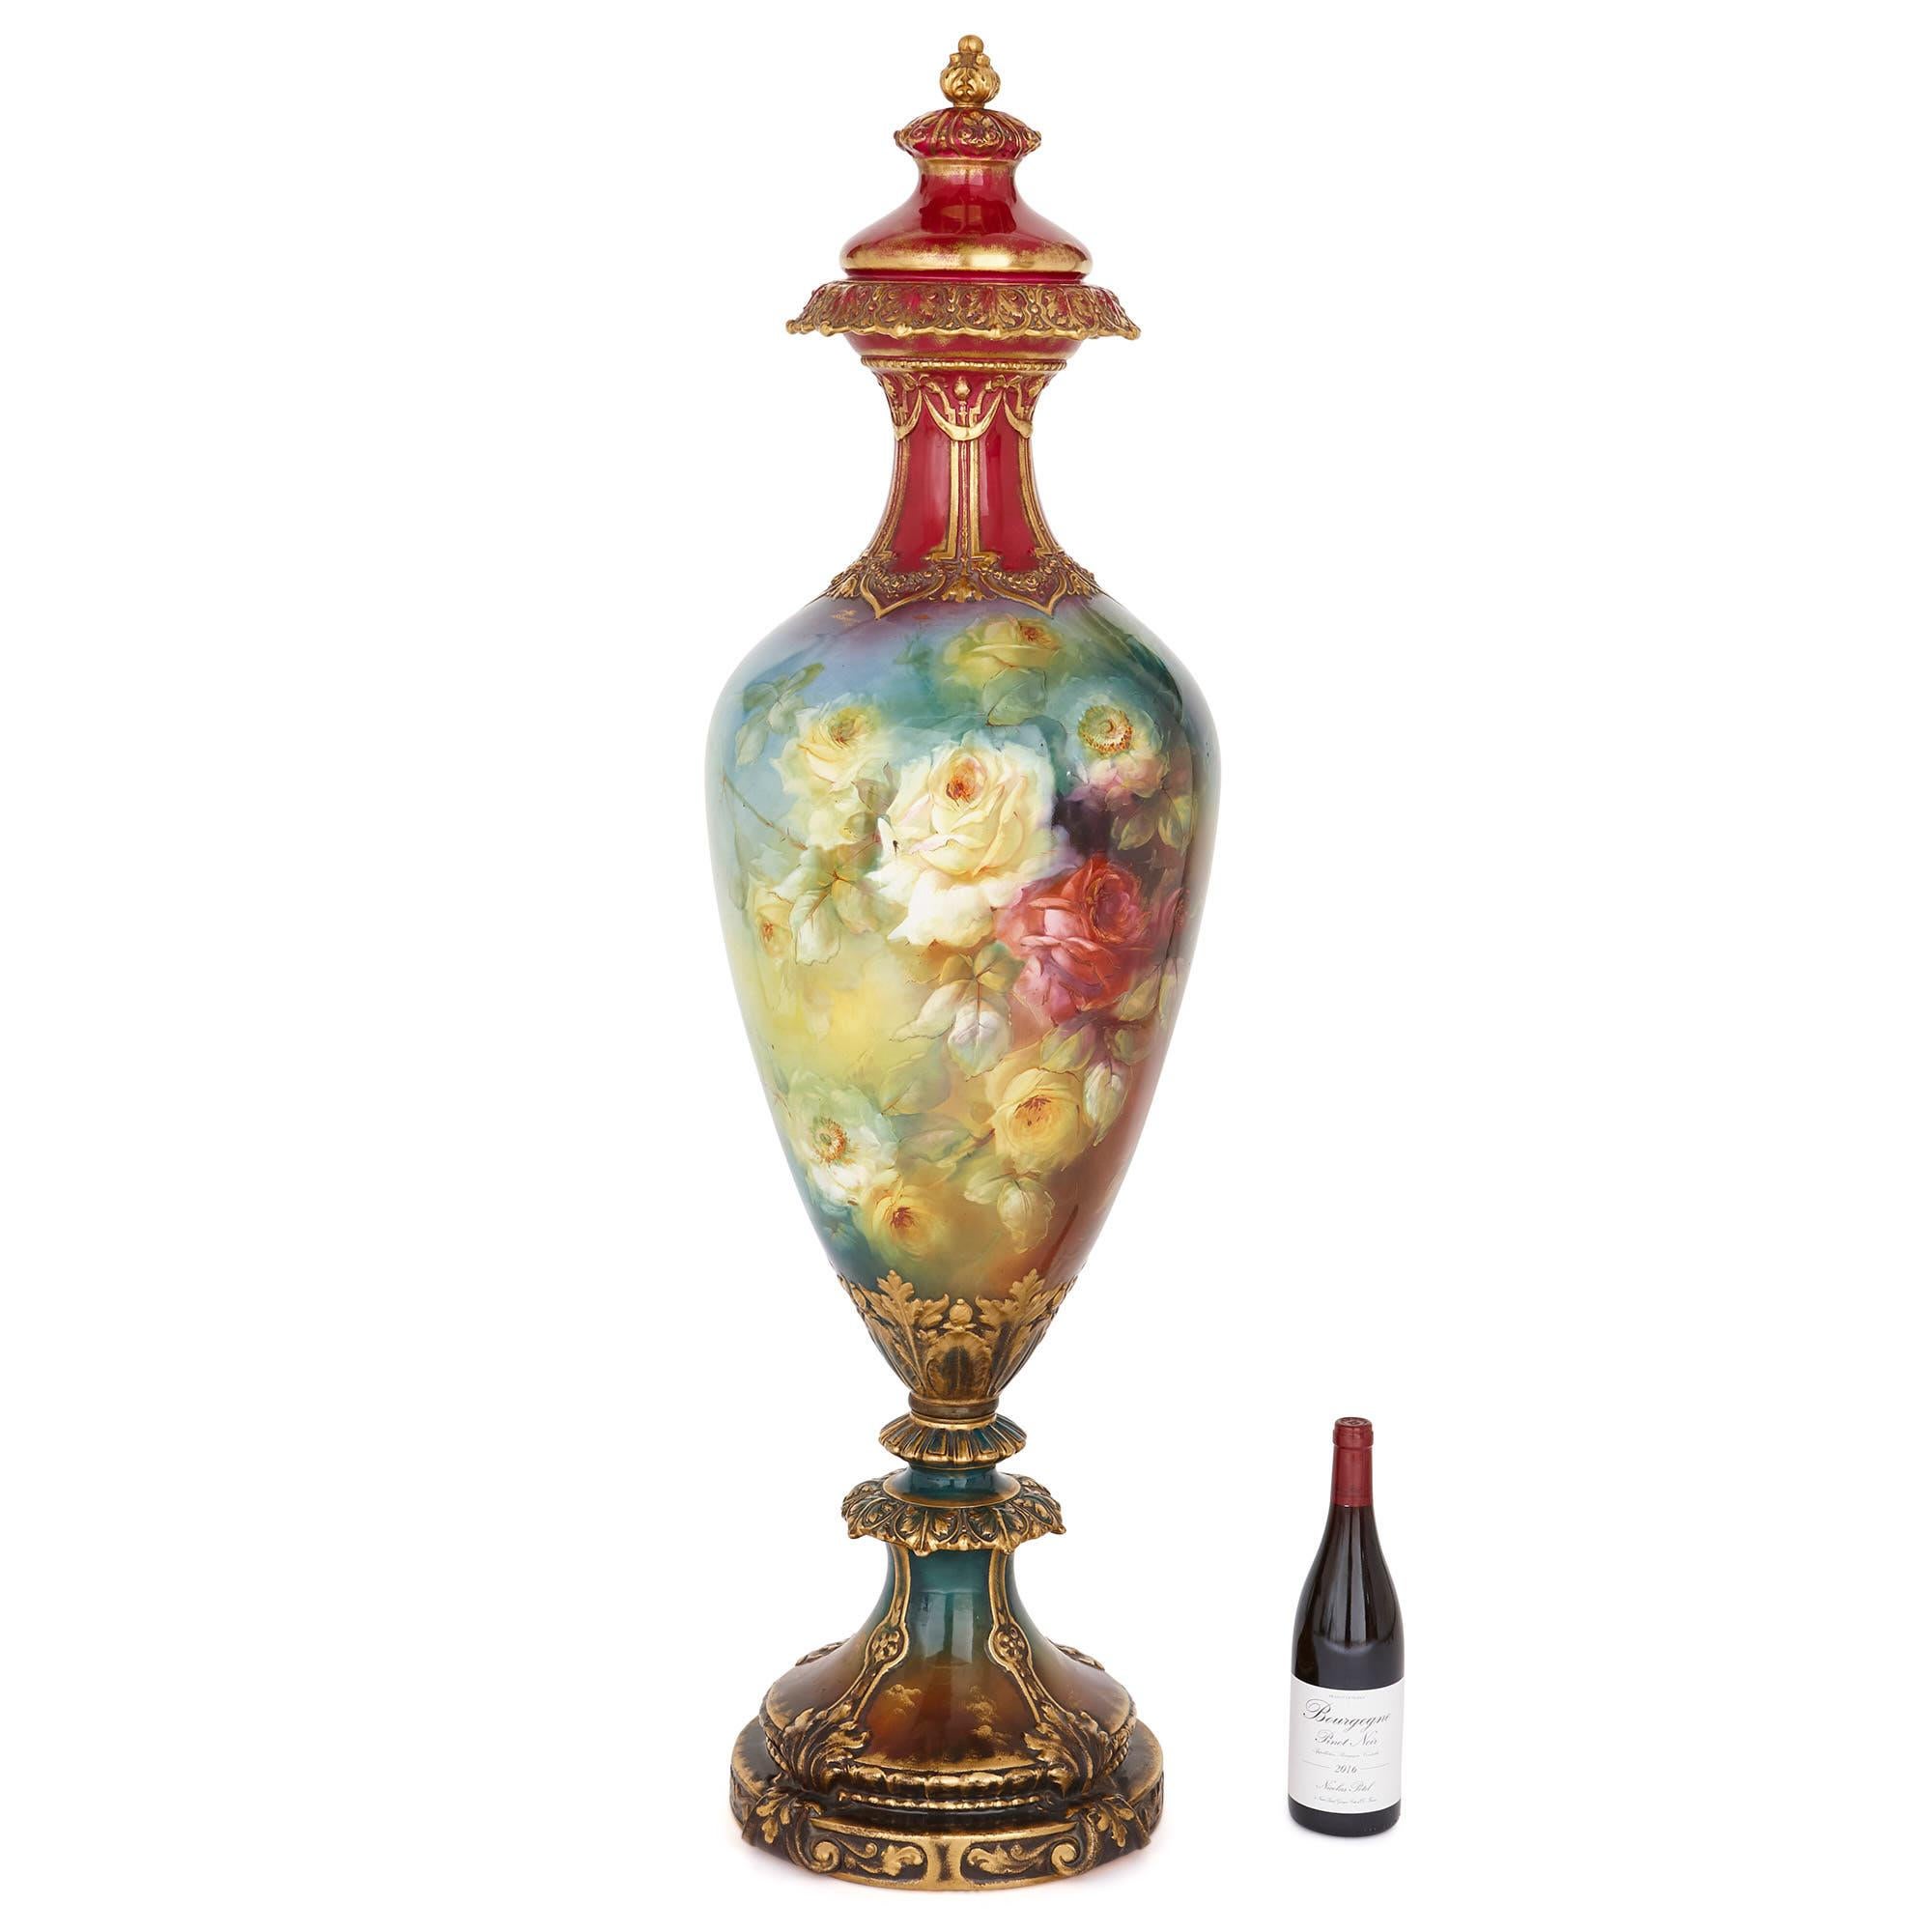 This porcelain vase is magnificent in both its scale—it measures an impressive 1m 25cm (49 inches)—and its Fine painted decoration. The vase was crafted in the early 20th Century by the prestigious Royal Bonn factory. Founded in 1836 in Germany by